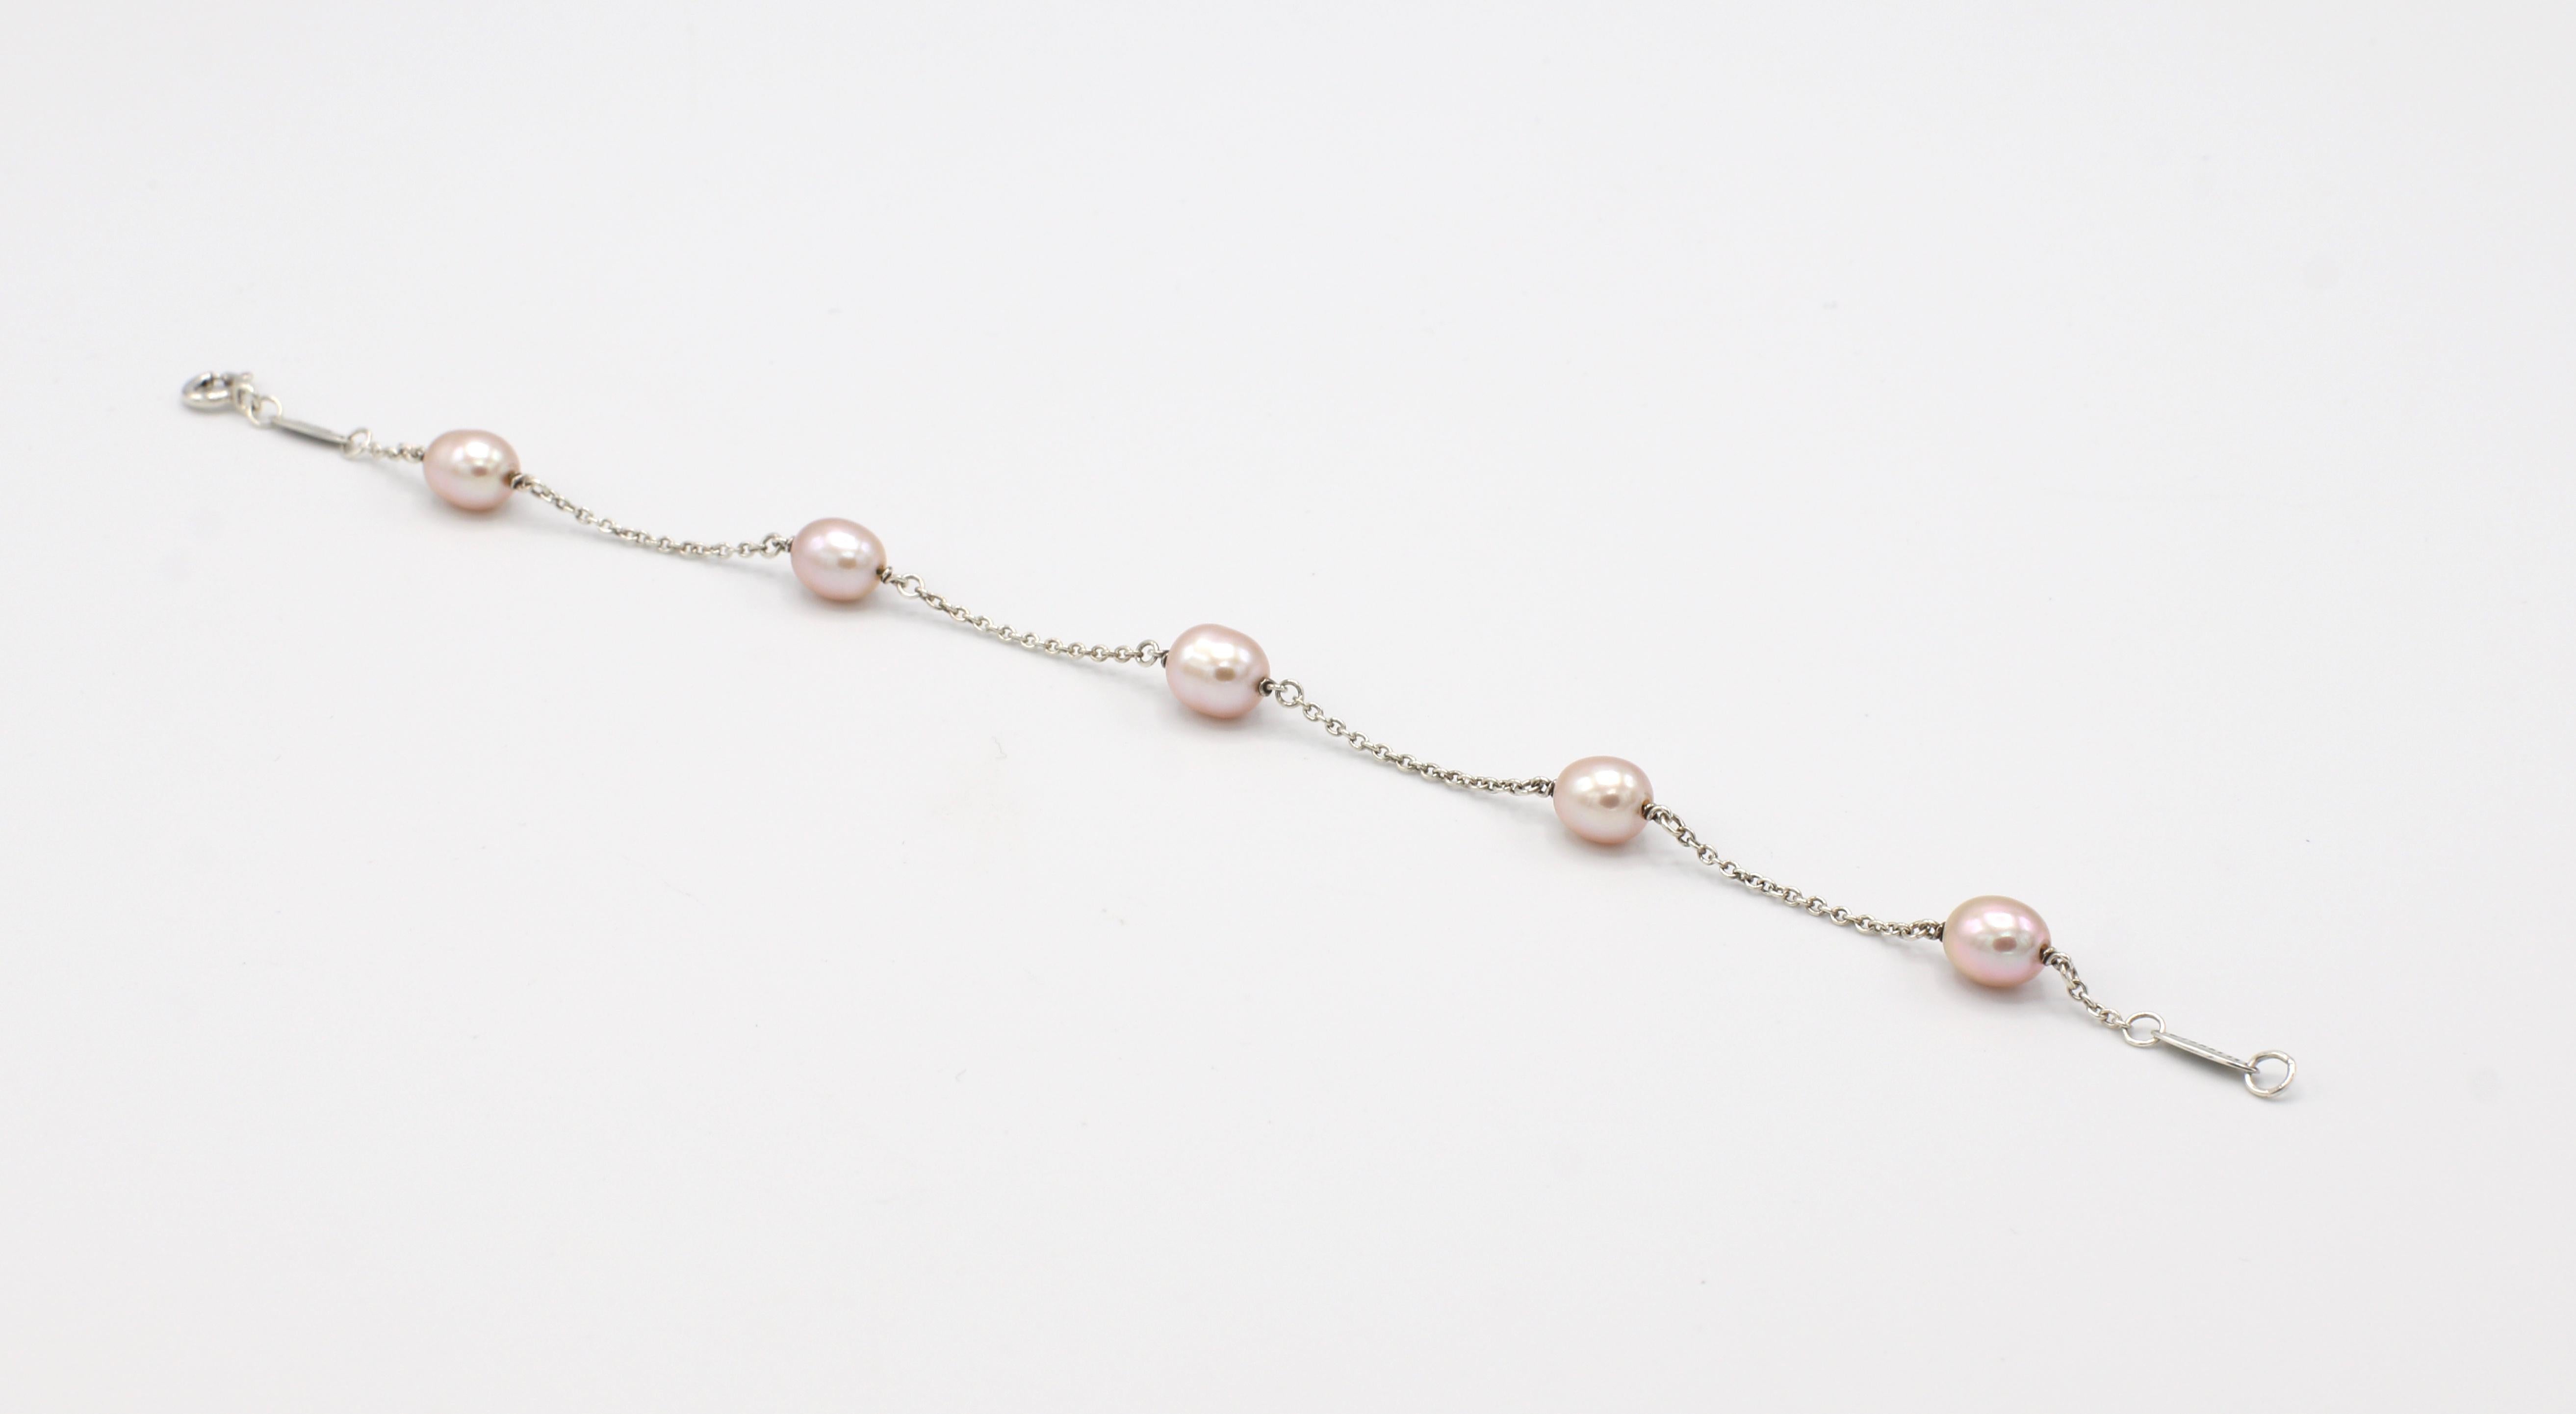 Tiffany & Co. Elsa Peretti Pearls By The Yard Sterling Silver Freshwater Cultured 5 Pearl Station Bracelet

Metal: Sterling Silver
Weight: 3.48 grams
Length: 7.25 inches 
Pearls: Approx. 6.5mm, pinkish white hue 
Signed: 